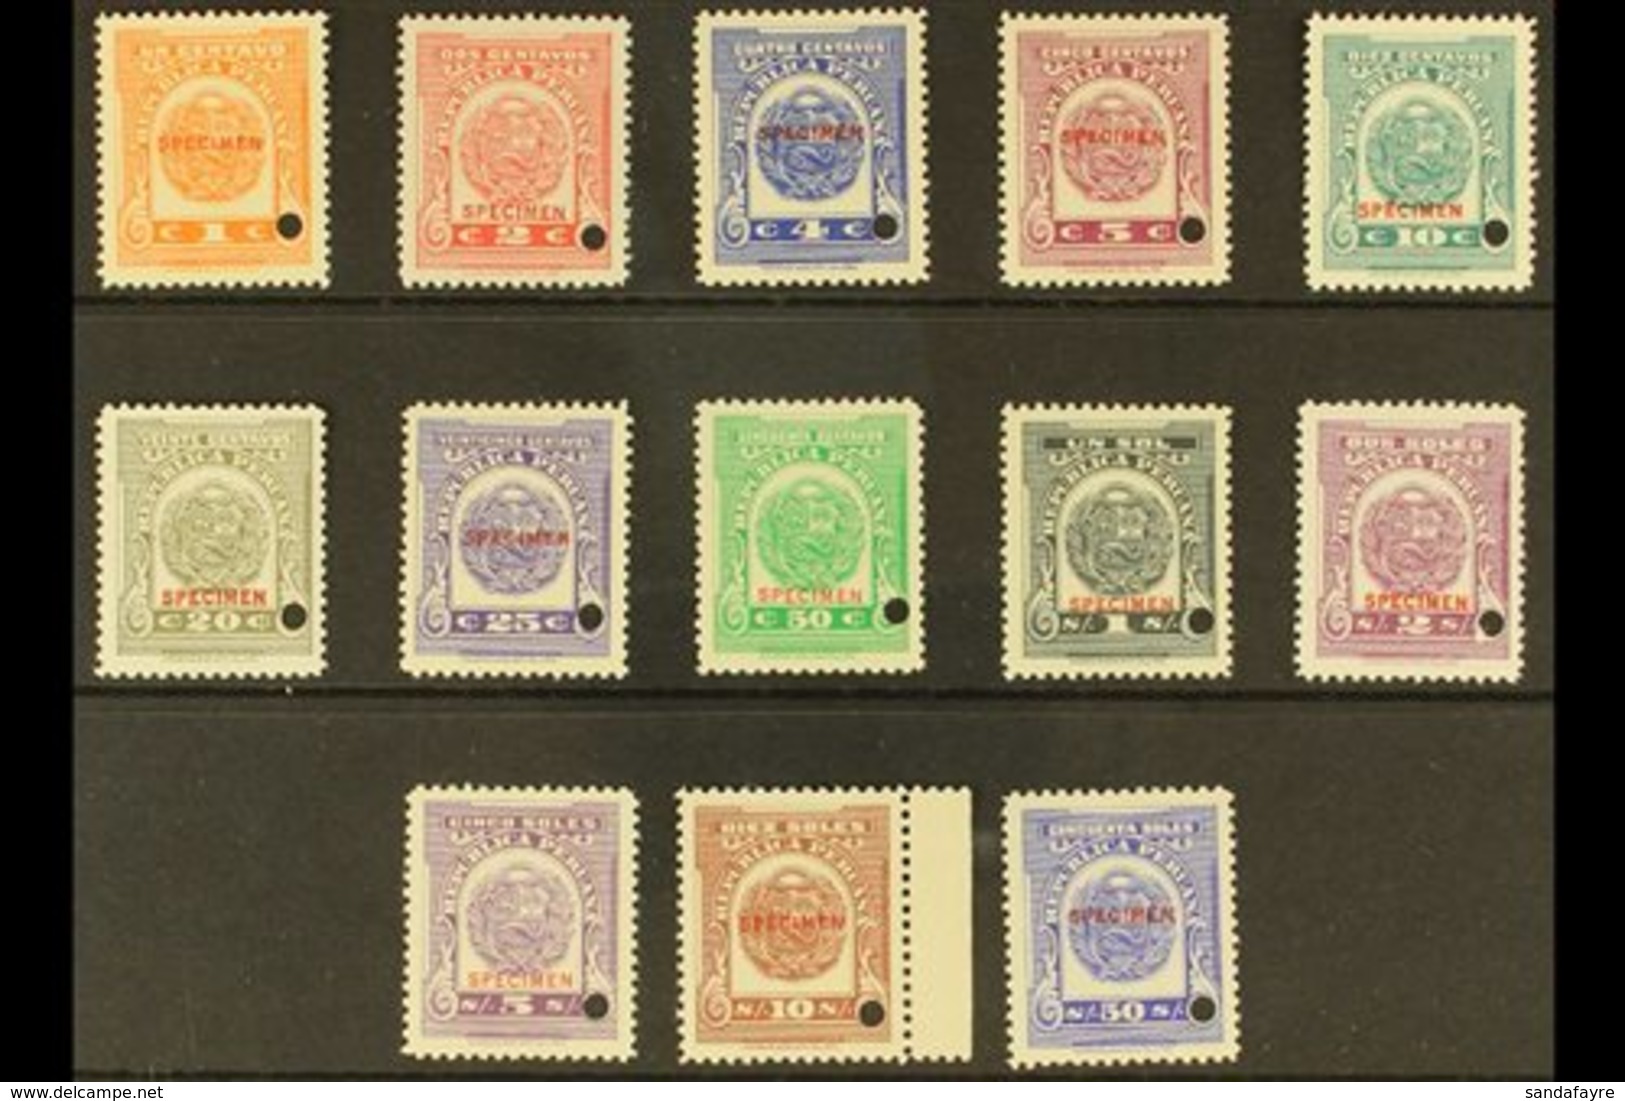 REVENUES DOCUMENT STAMPS 1937 Complete Set With "SPECIMEN" Overprints And Small Security Punch Holes, Never Hinged Mint  - Perú